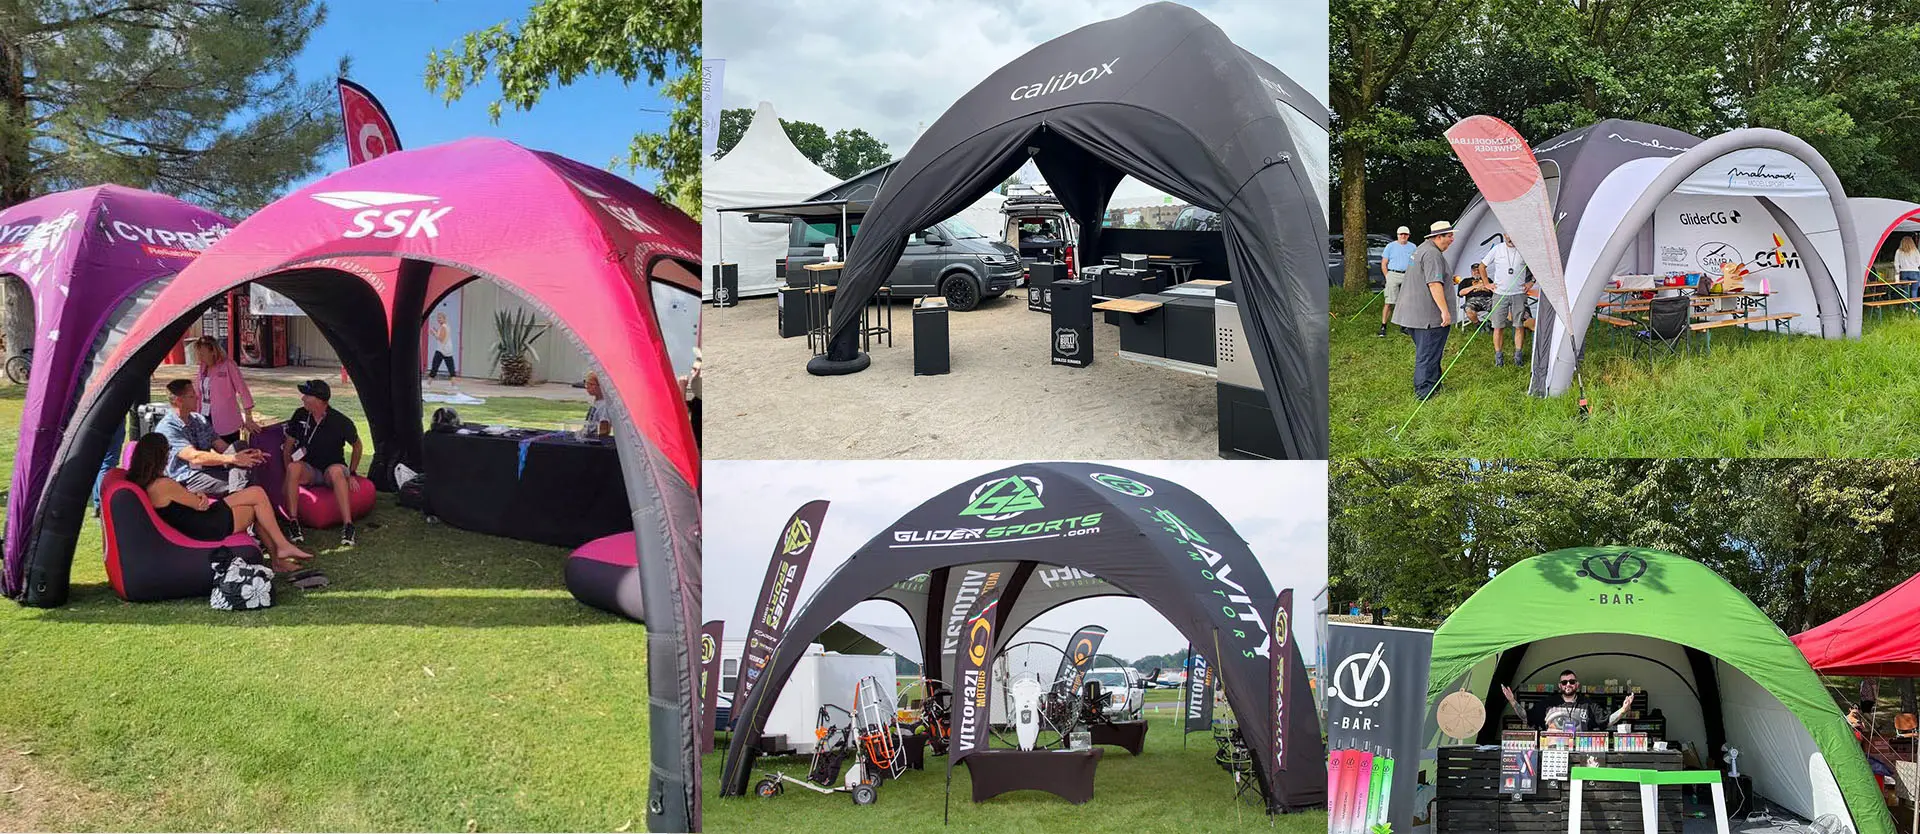 Future Trends in Canopy Tents The 10 x 10 canopy tent industry is continuously evolving, with new trends and innovations enhancing their functionality and appeal. Here are some future trends to watch: